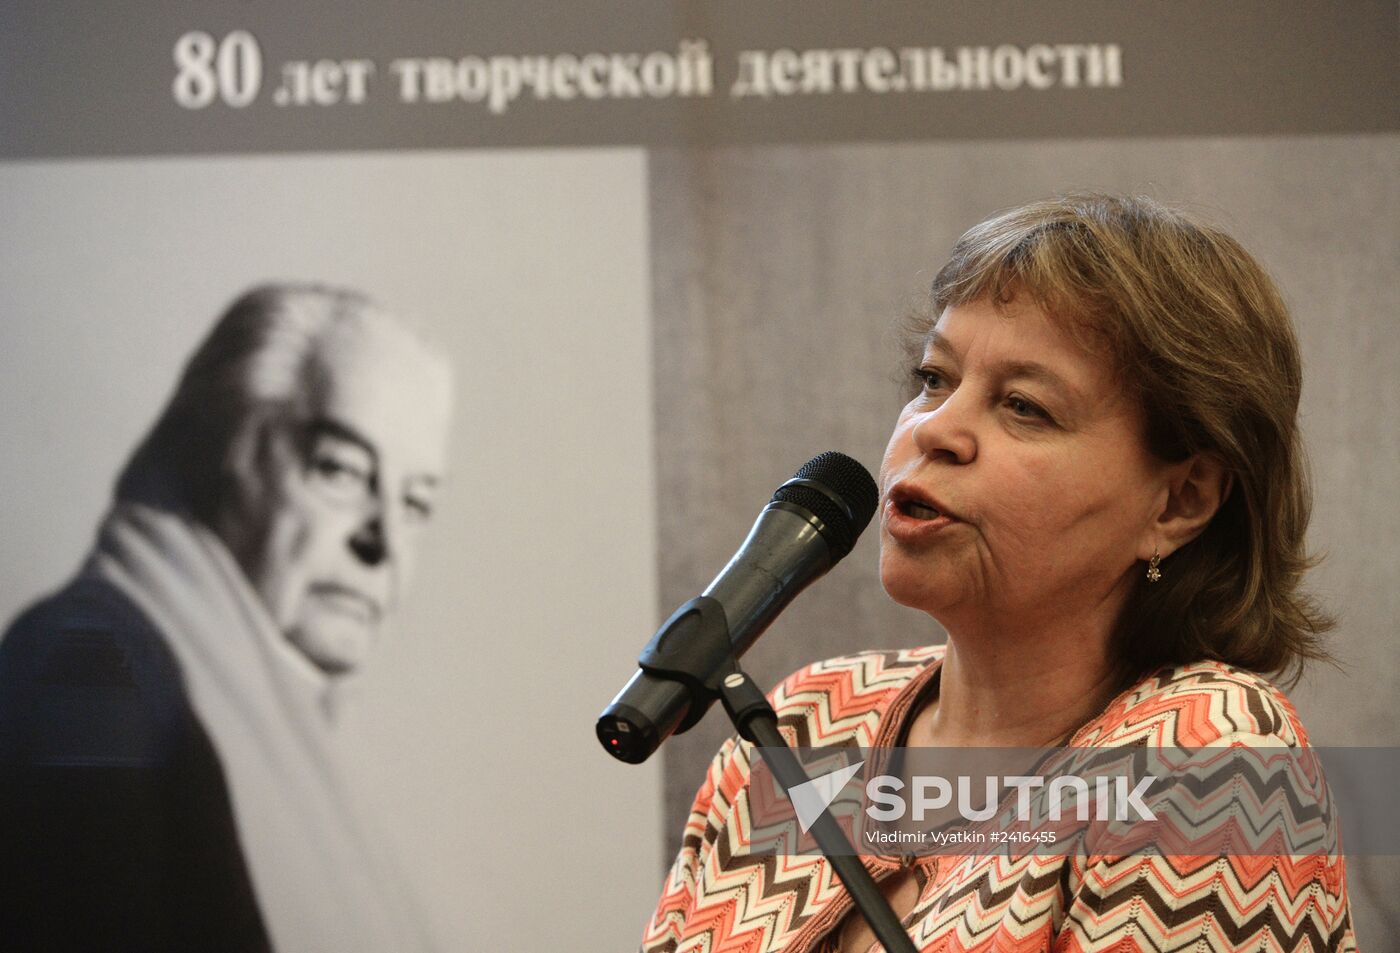 International news conference, "The Works of Yury Lyubimov in the Russian and World Theater"